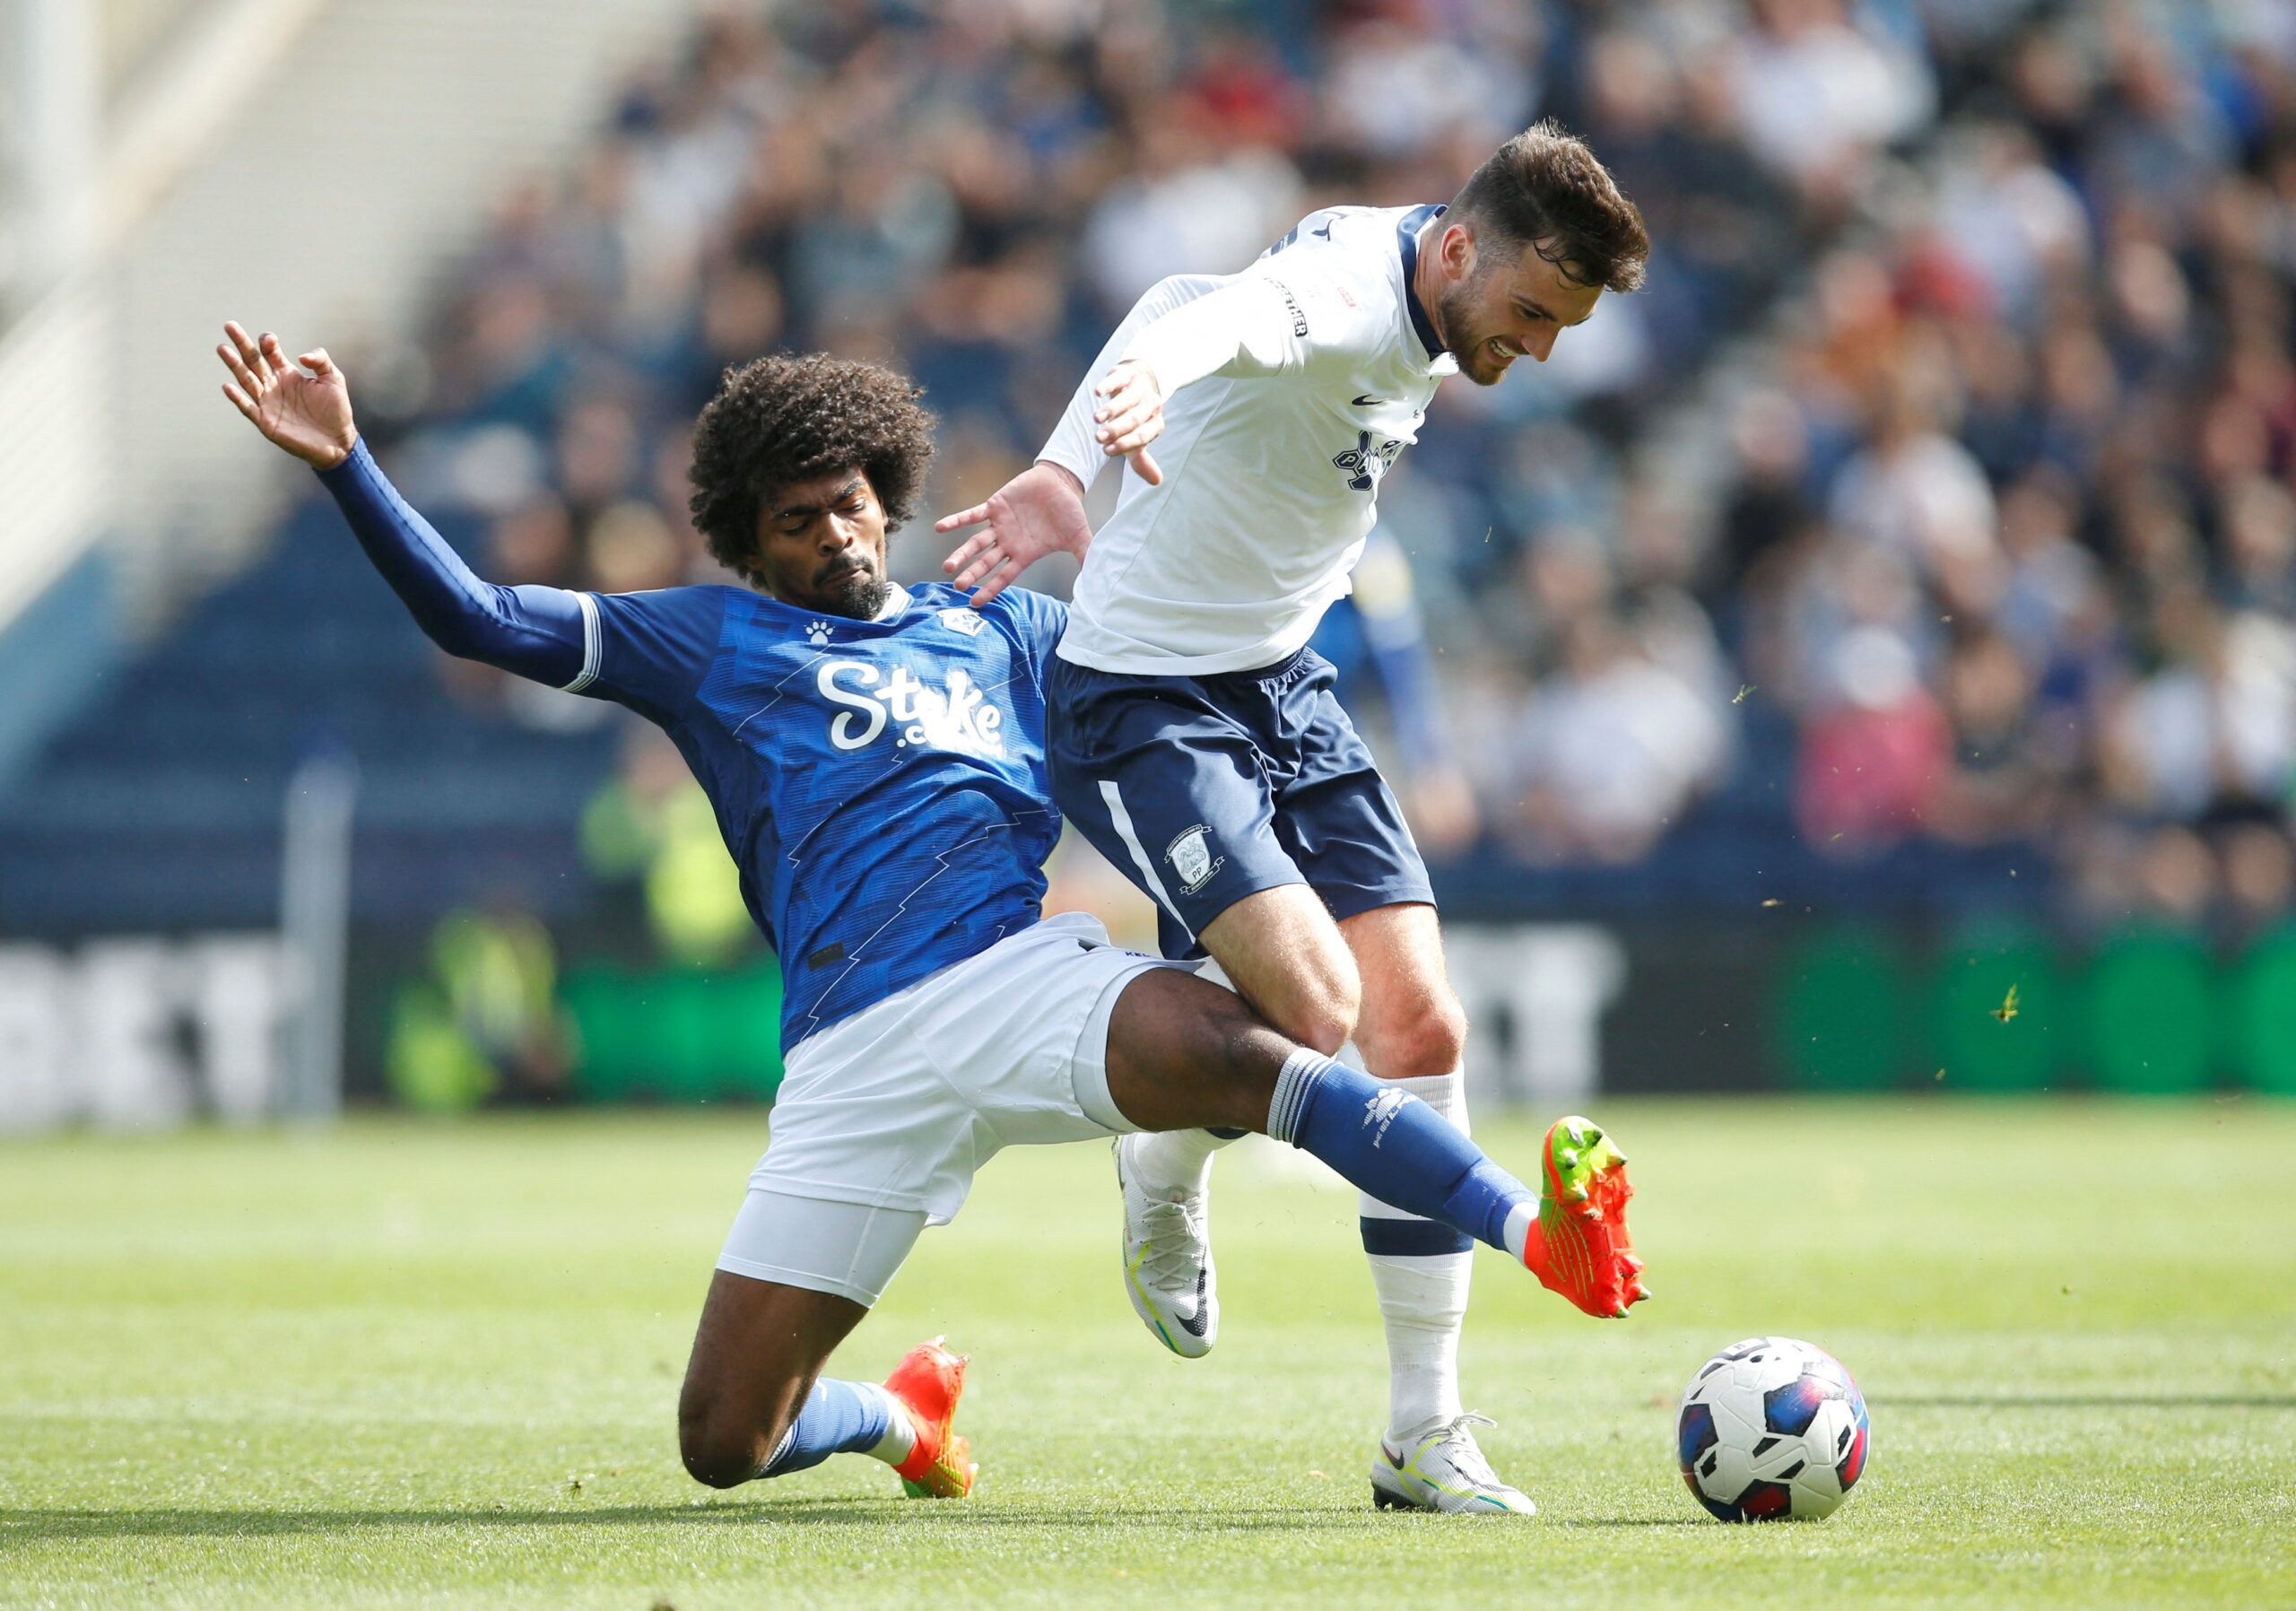 Soccer Football - Championship - Preston North End v Watford - Deepdale, Preston, Britain - August 20, 2022 Watford's Hamza Choudhury and Preston North End's Troy Parrott in action Action Images/Ed Sykes  EDITORIAL USE ONLY. No use with unauthorized audio, video, data, fixture lists, club/league logos or 